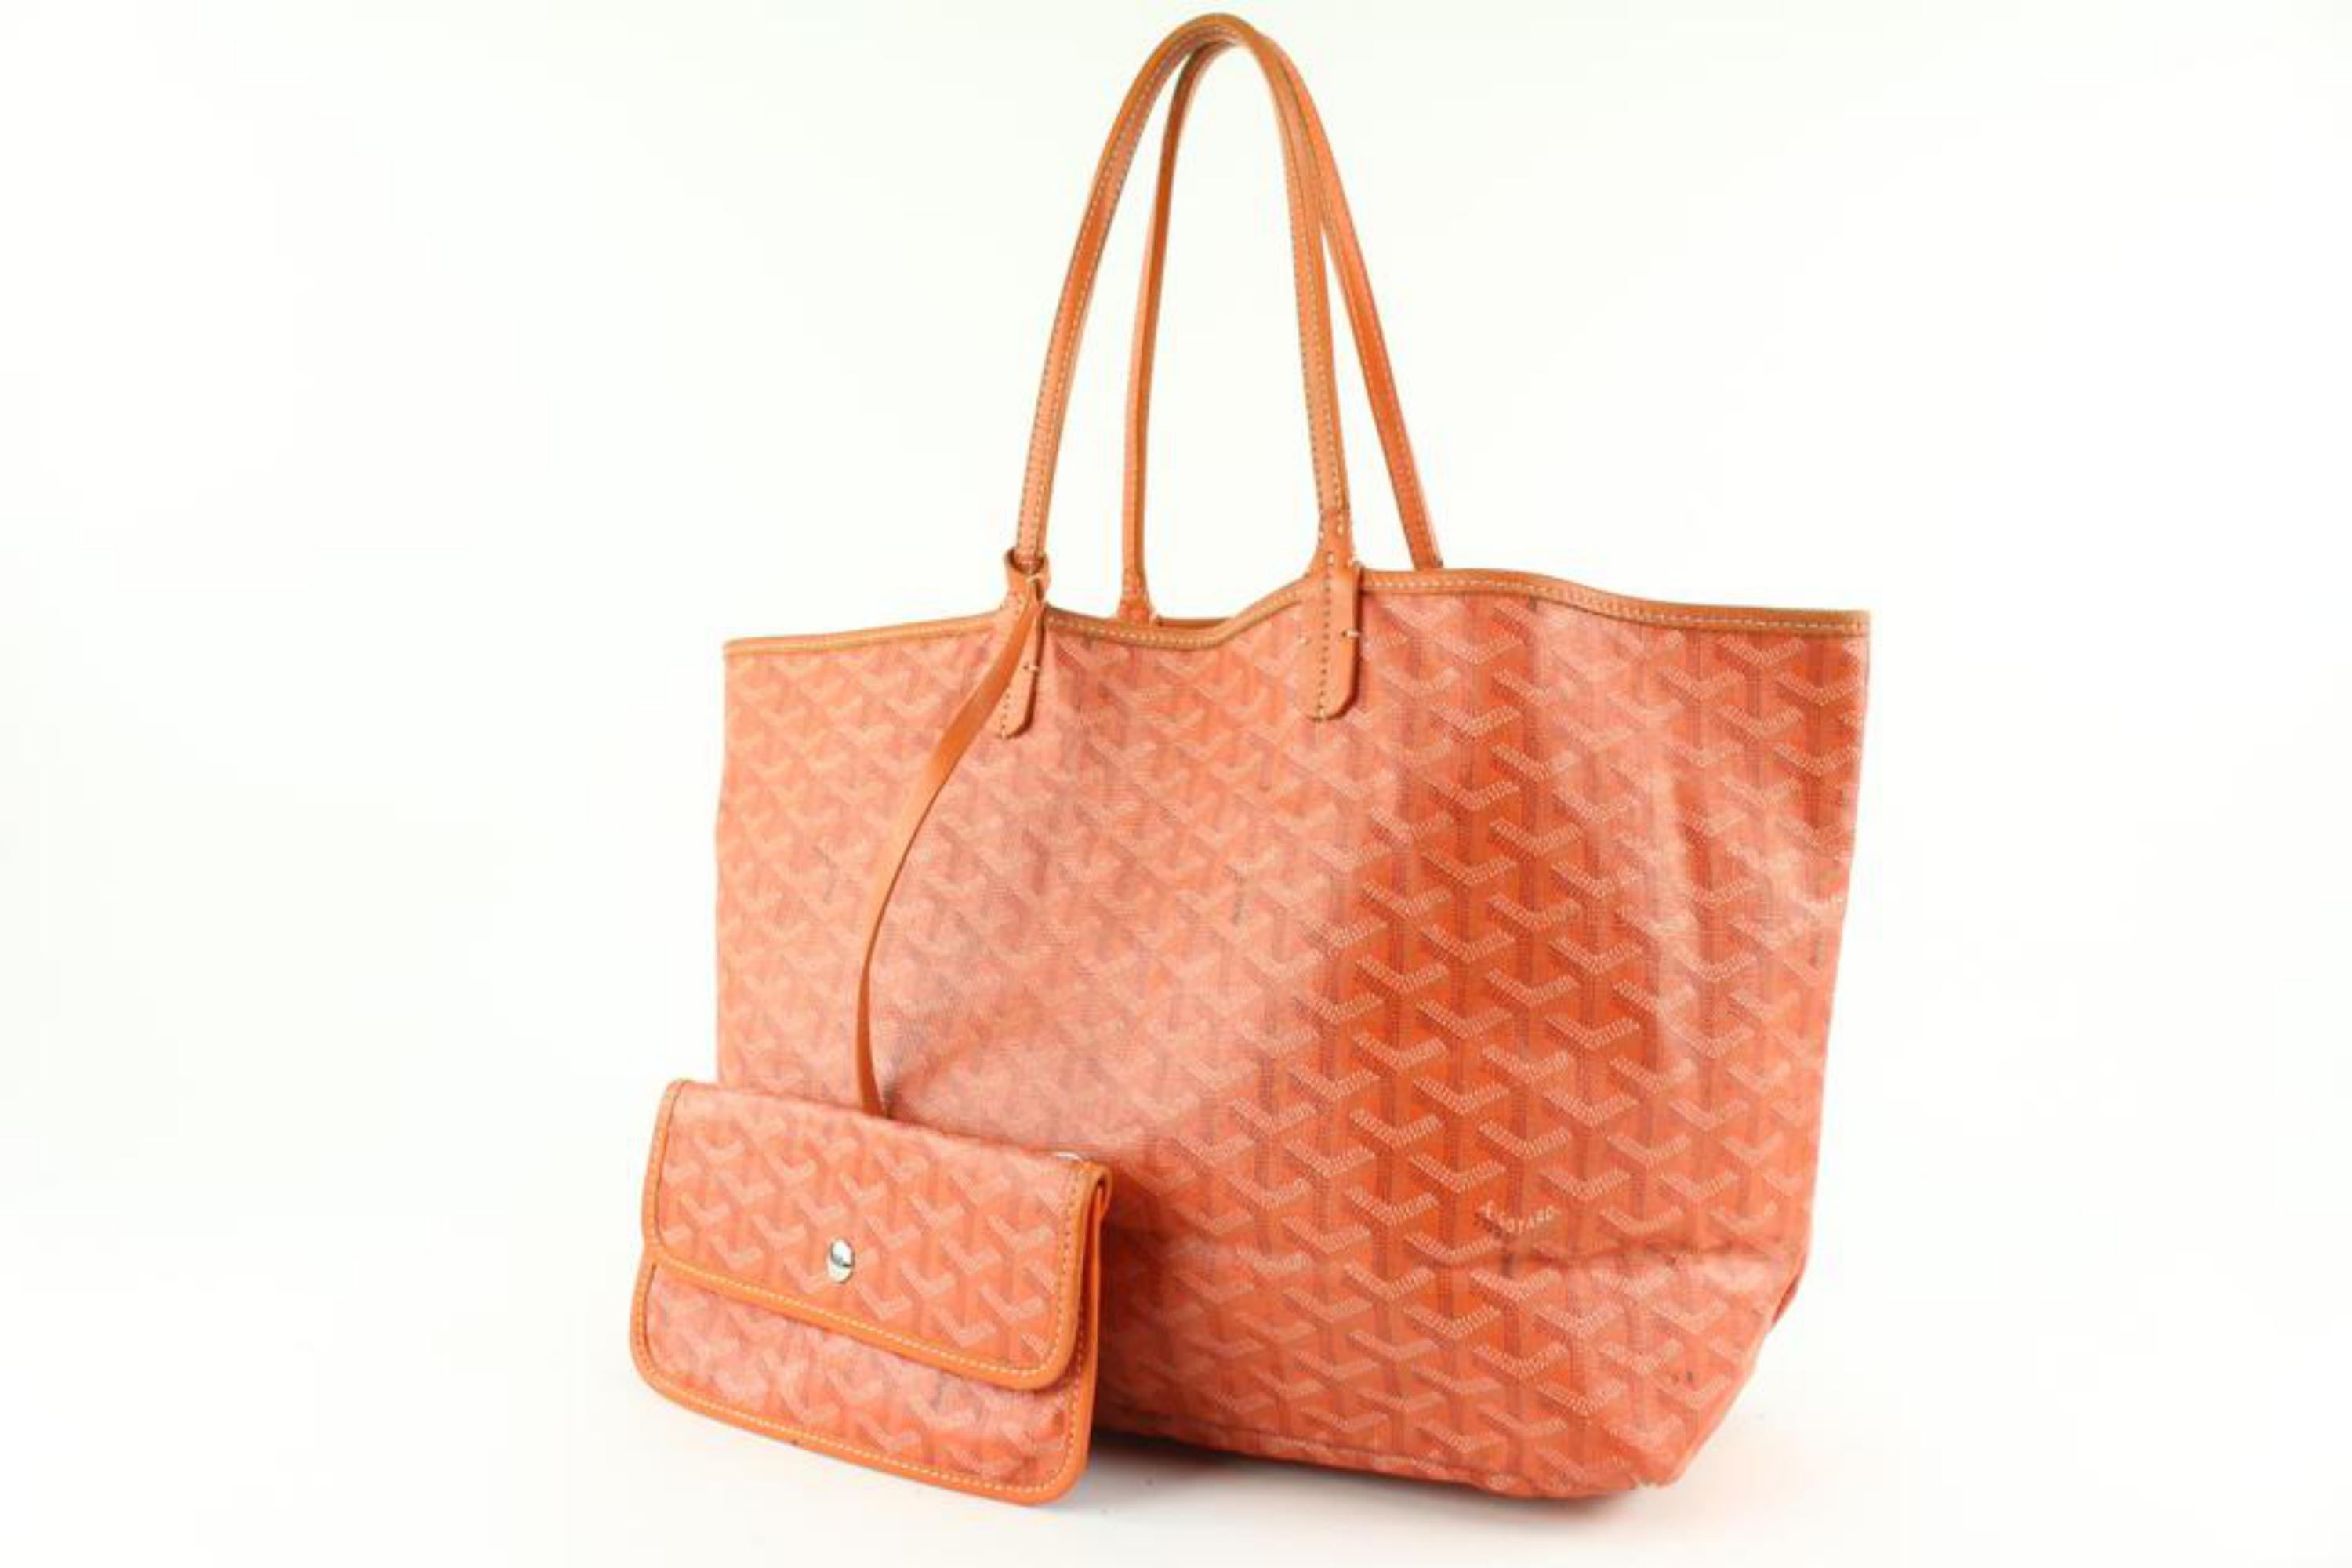 Goyard Orange Chevron St Louis PM Tote with Pouch 1222gy27
Date Code/Serial Number: BAL 020114
Made In: France
Measurements: Length:  18.5